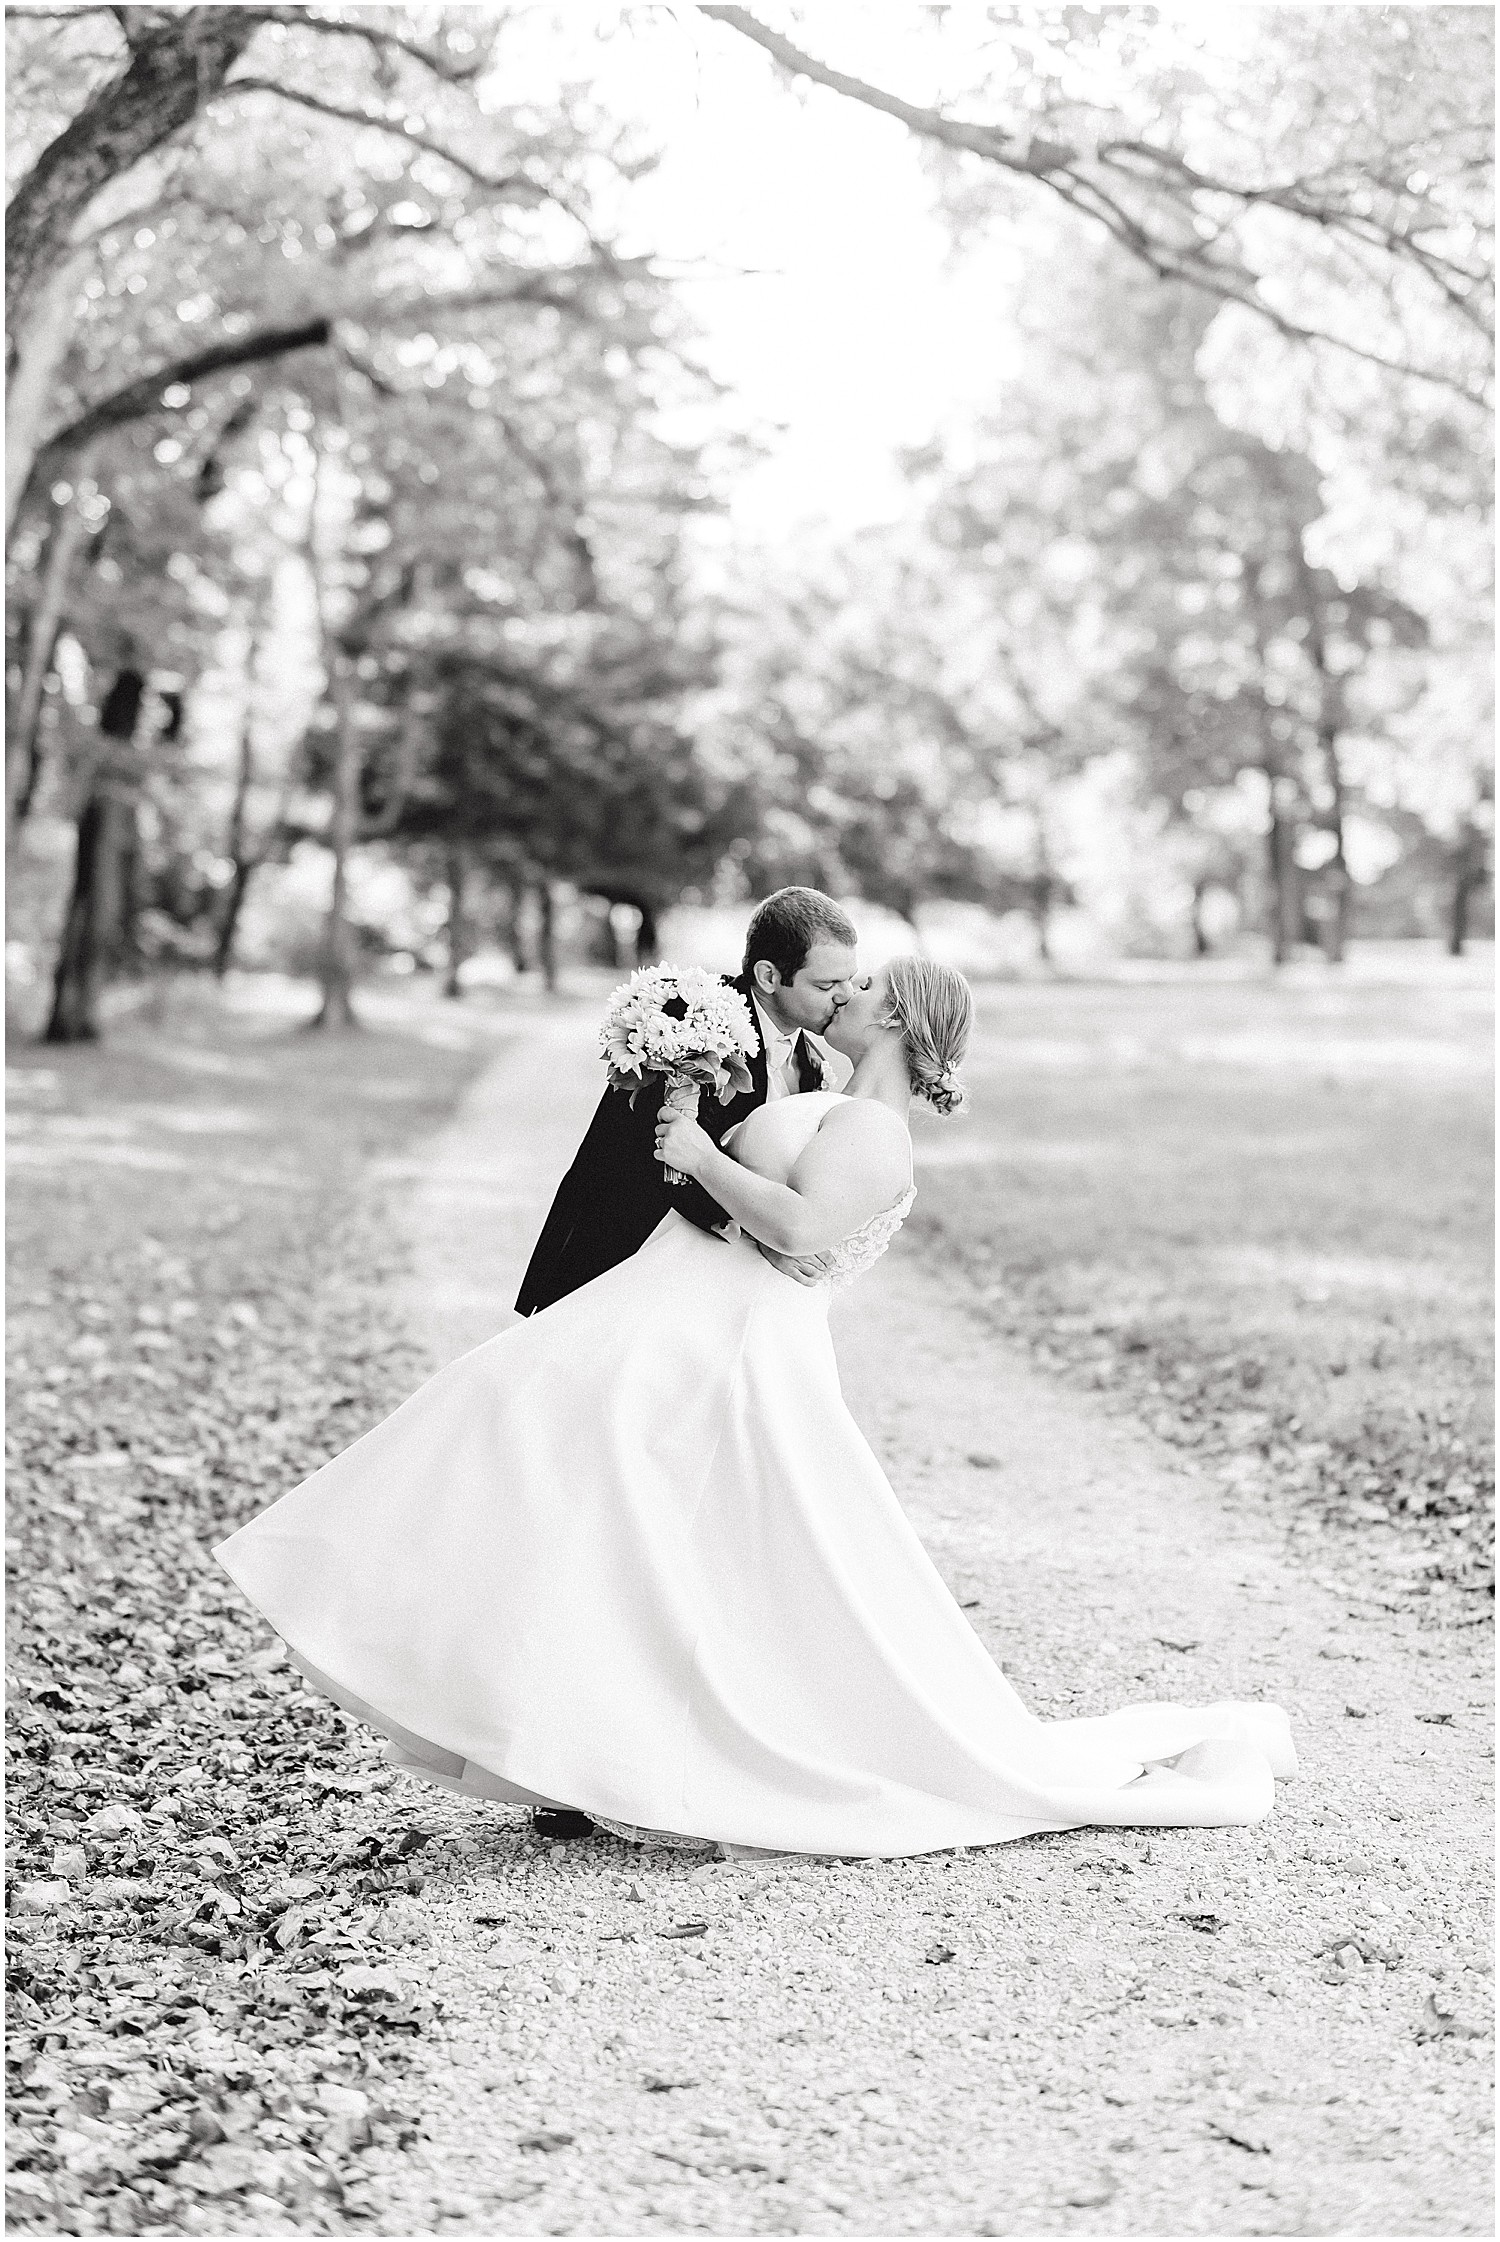 black and white image of bride and groom kissing under trees on kempker's back 40 wedding day